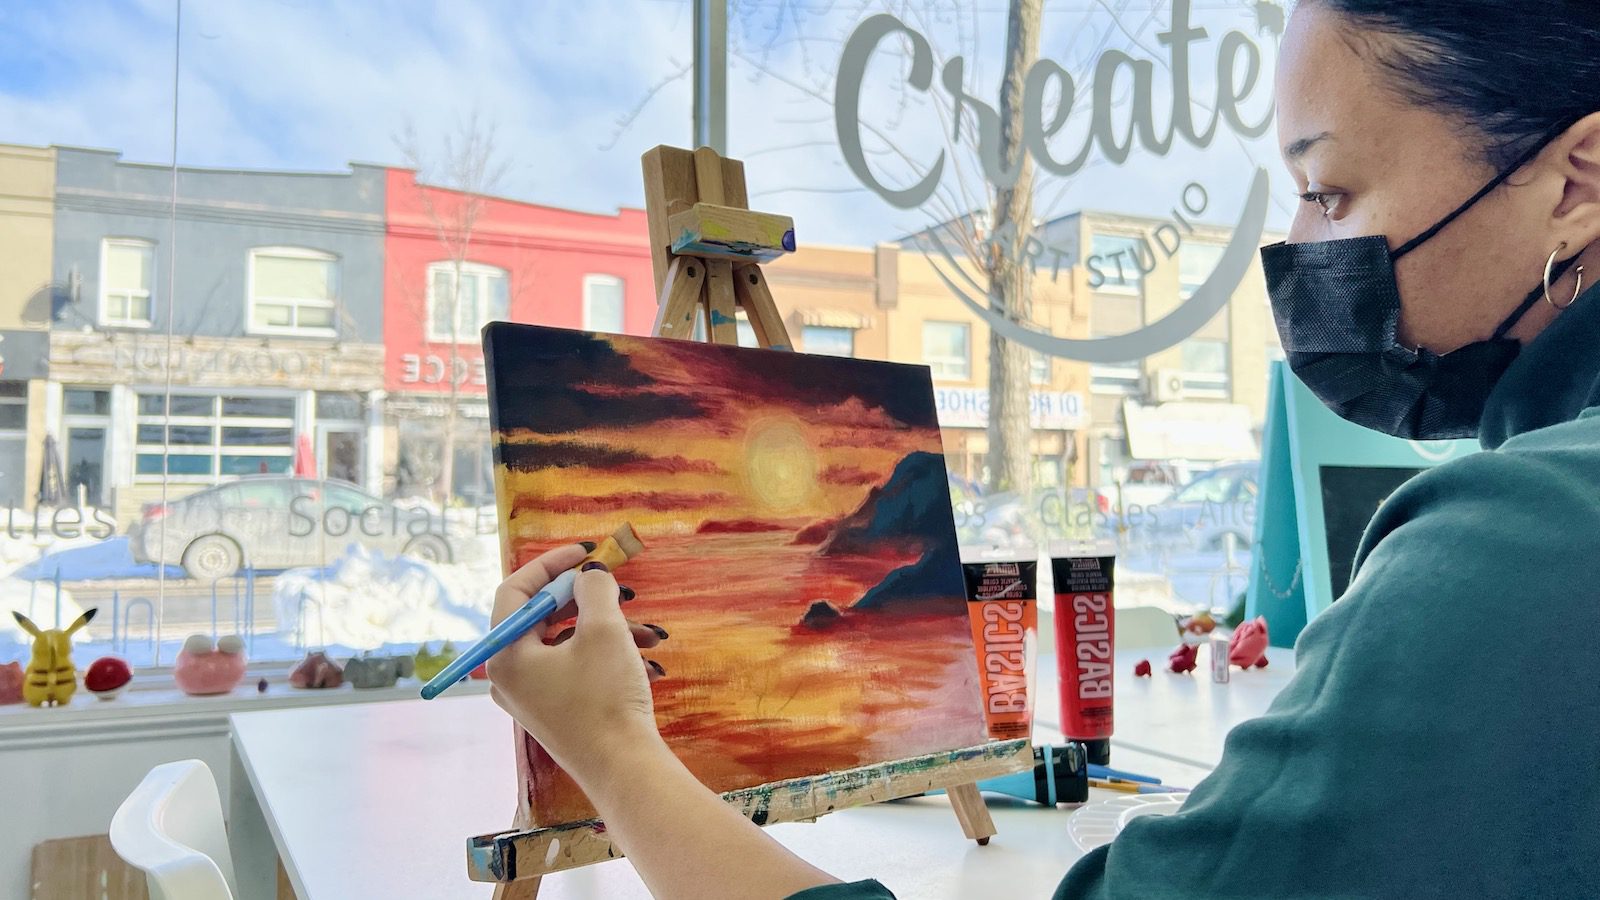 Create Art Studio - Join our art and design classes, workshops and events